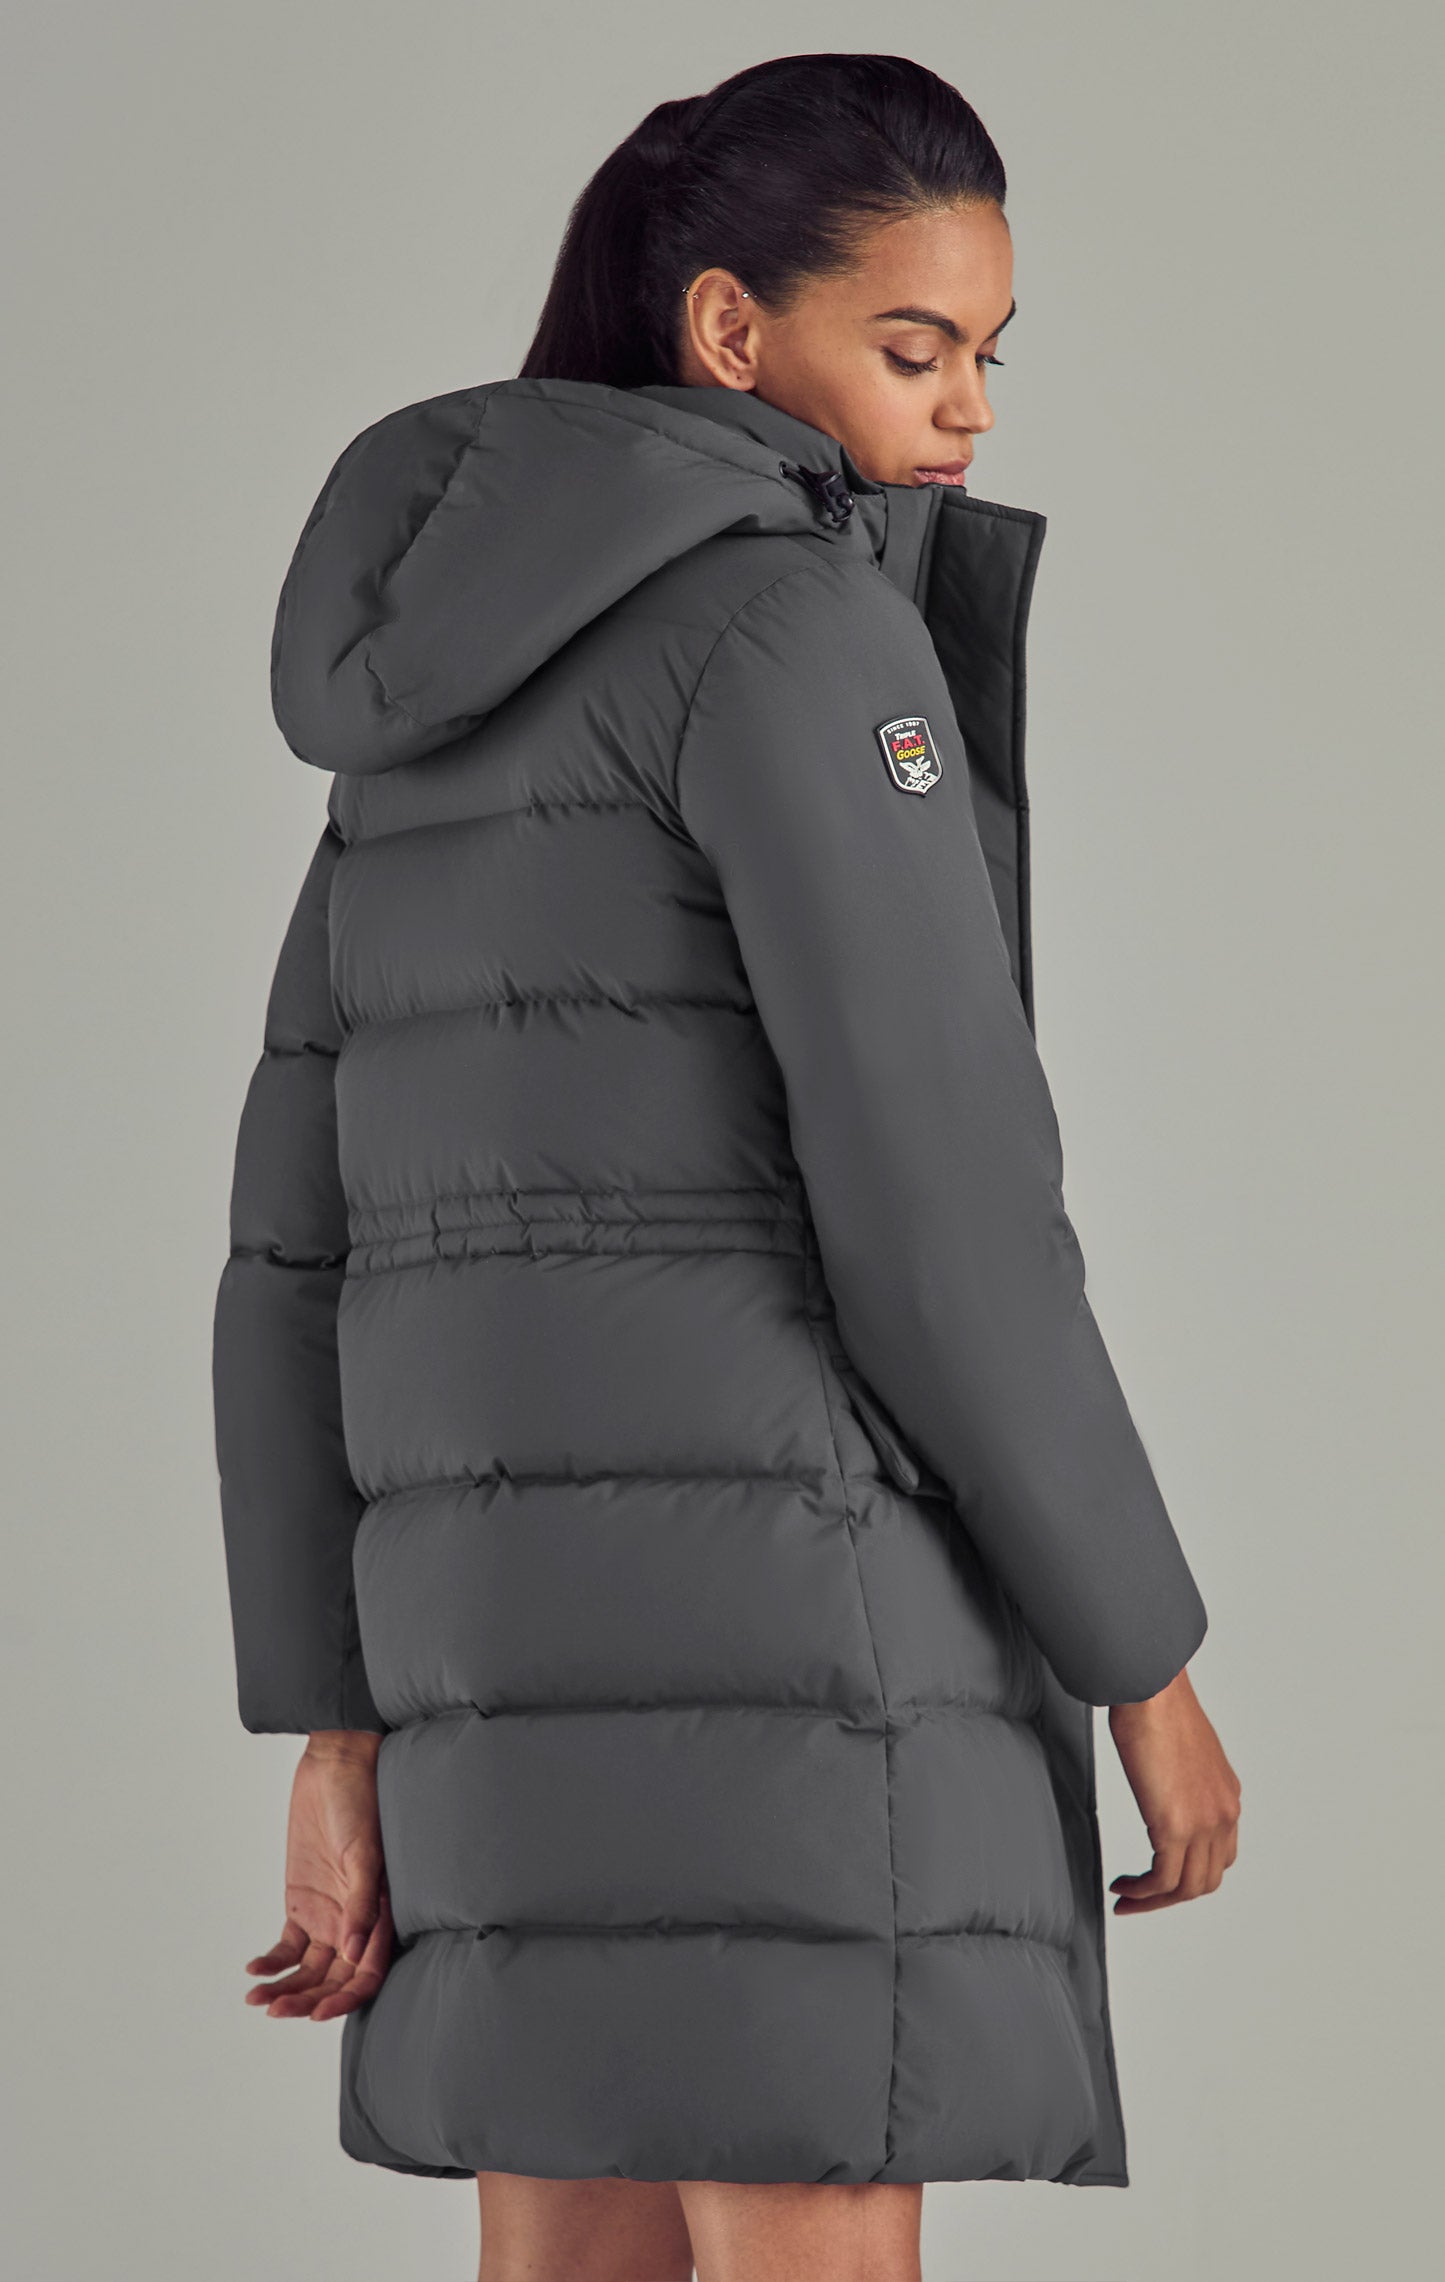 Parajumpers - Phat padded jacket